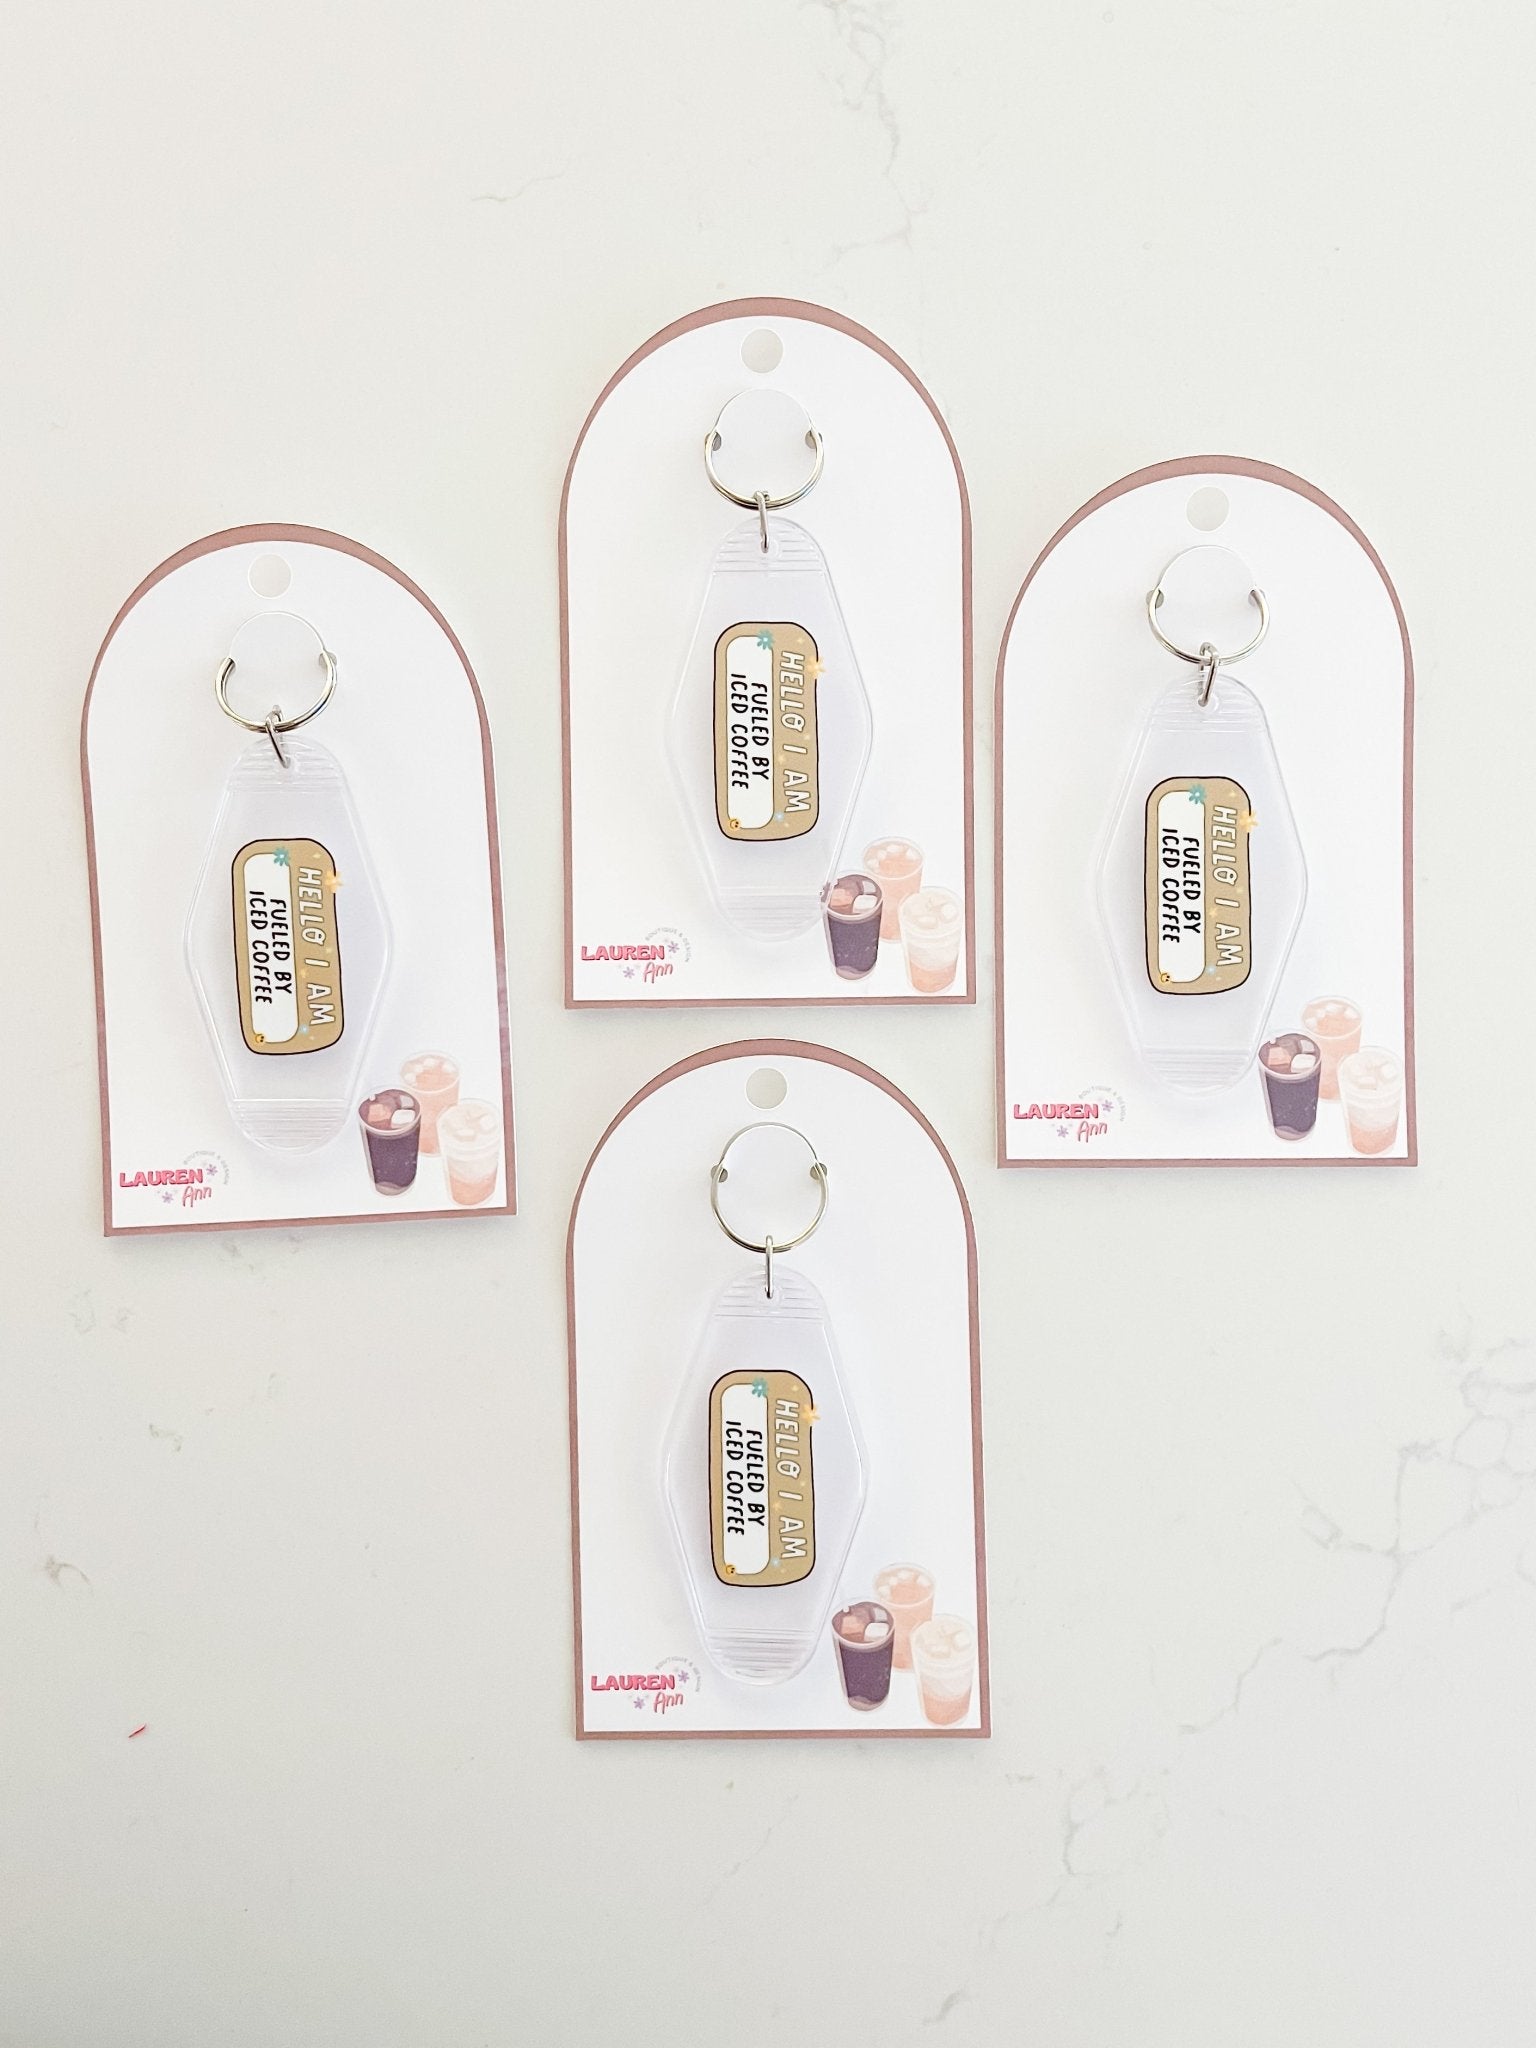 Fueled by Iced Coffee Keychain - Designs by Lauren Ann